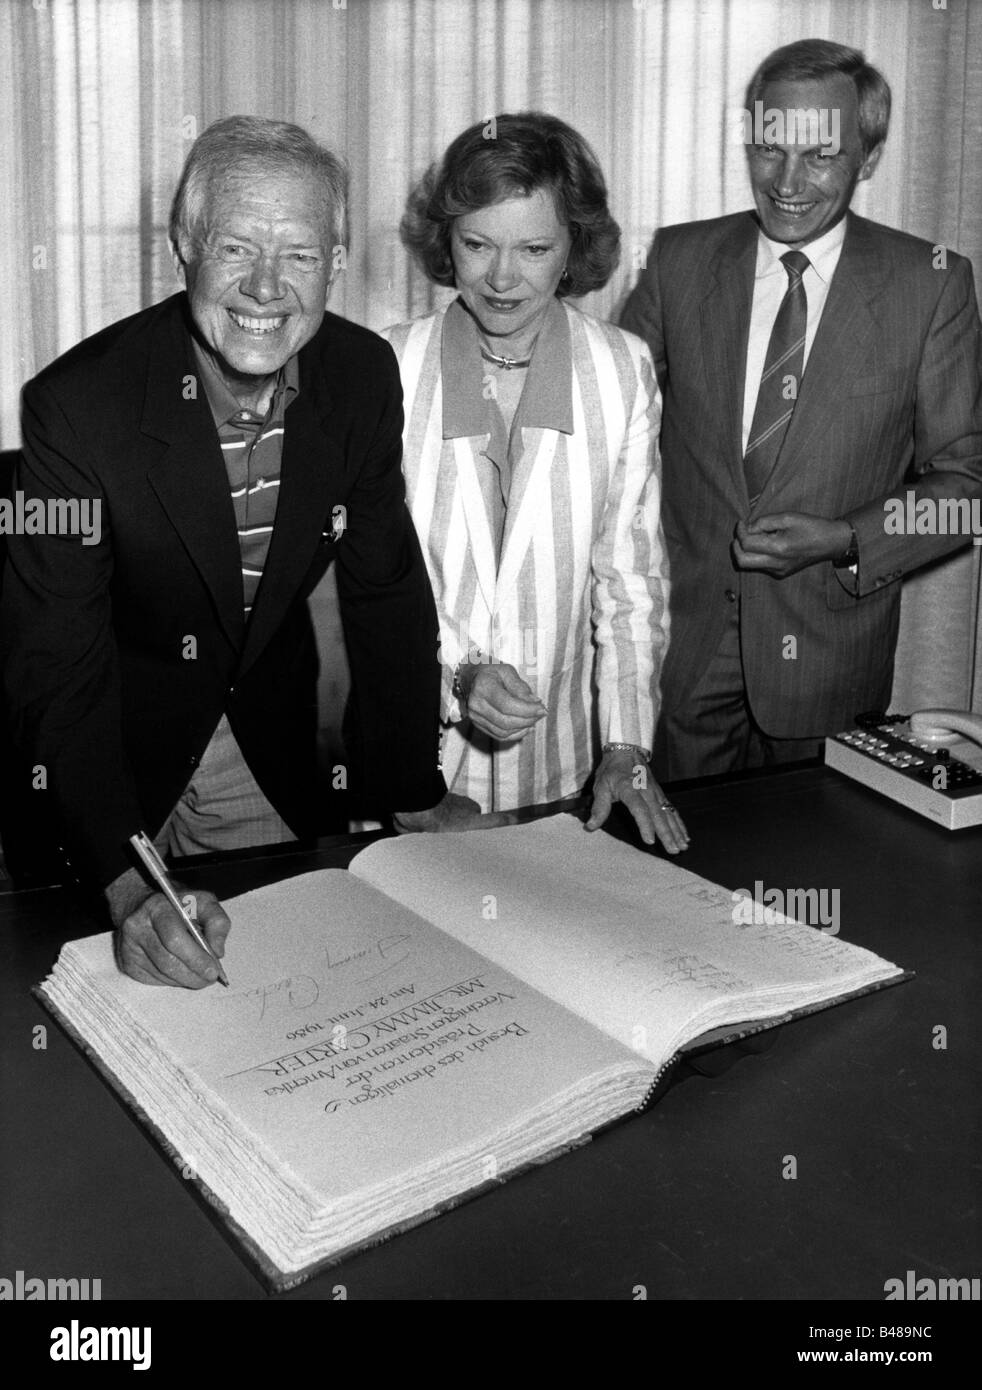 Carter, James 'Jimmy' * 1.10.1924, American politician (Dem.), 39th President of the USA 20.1.1977 - 20.1.1981, visit to West Germany, signing the Golden Bokk of Munich, with wife Rosalyn and Lord Mayor Georg Kronawitter, 24.6.1986, , Stock Photo